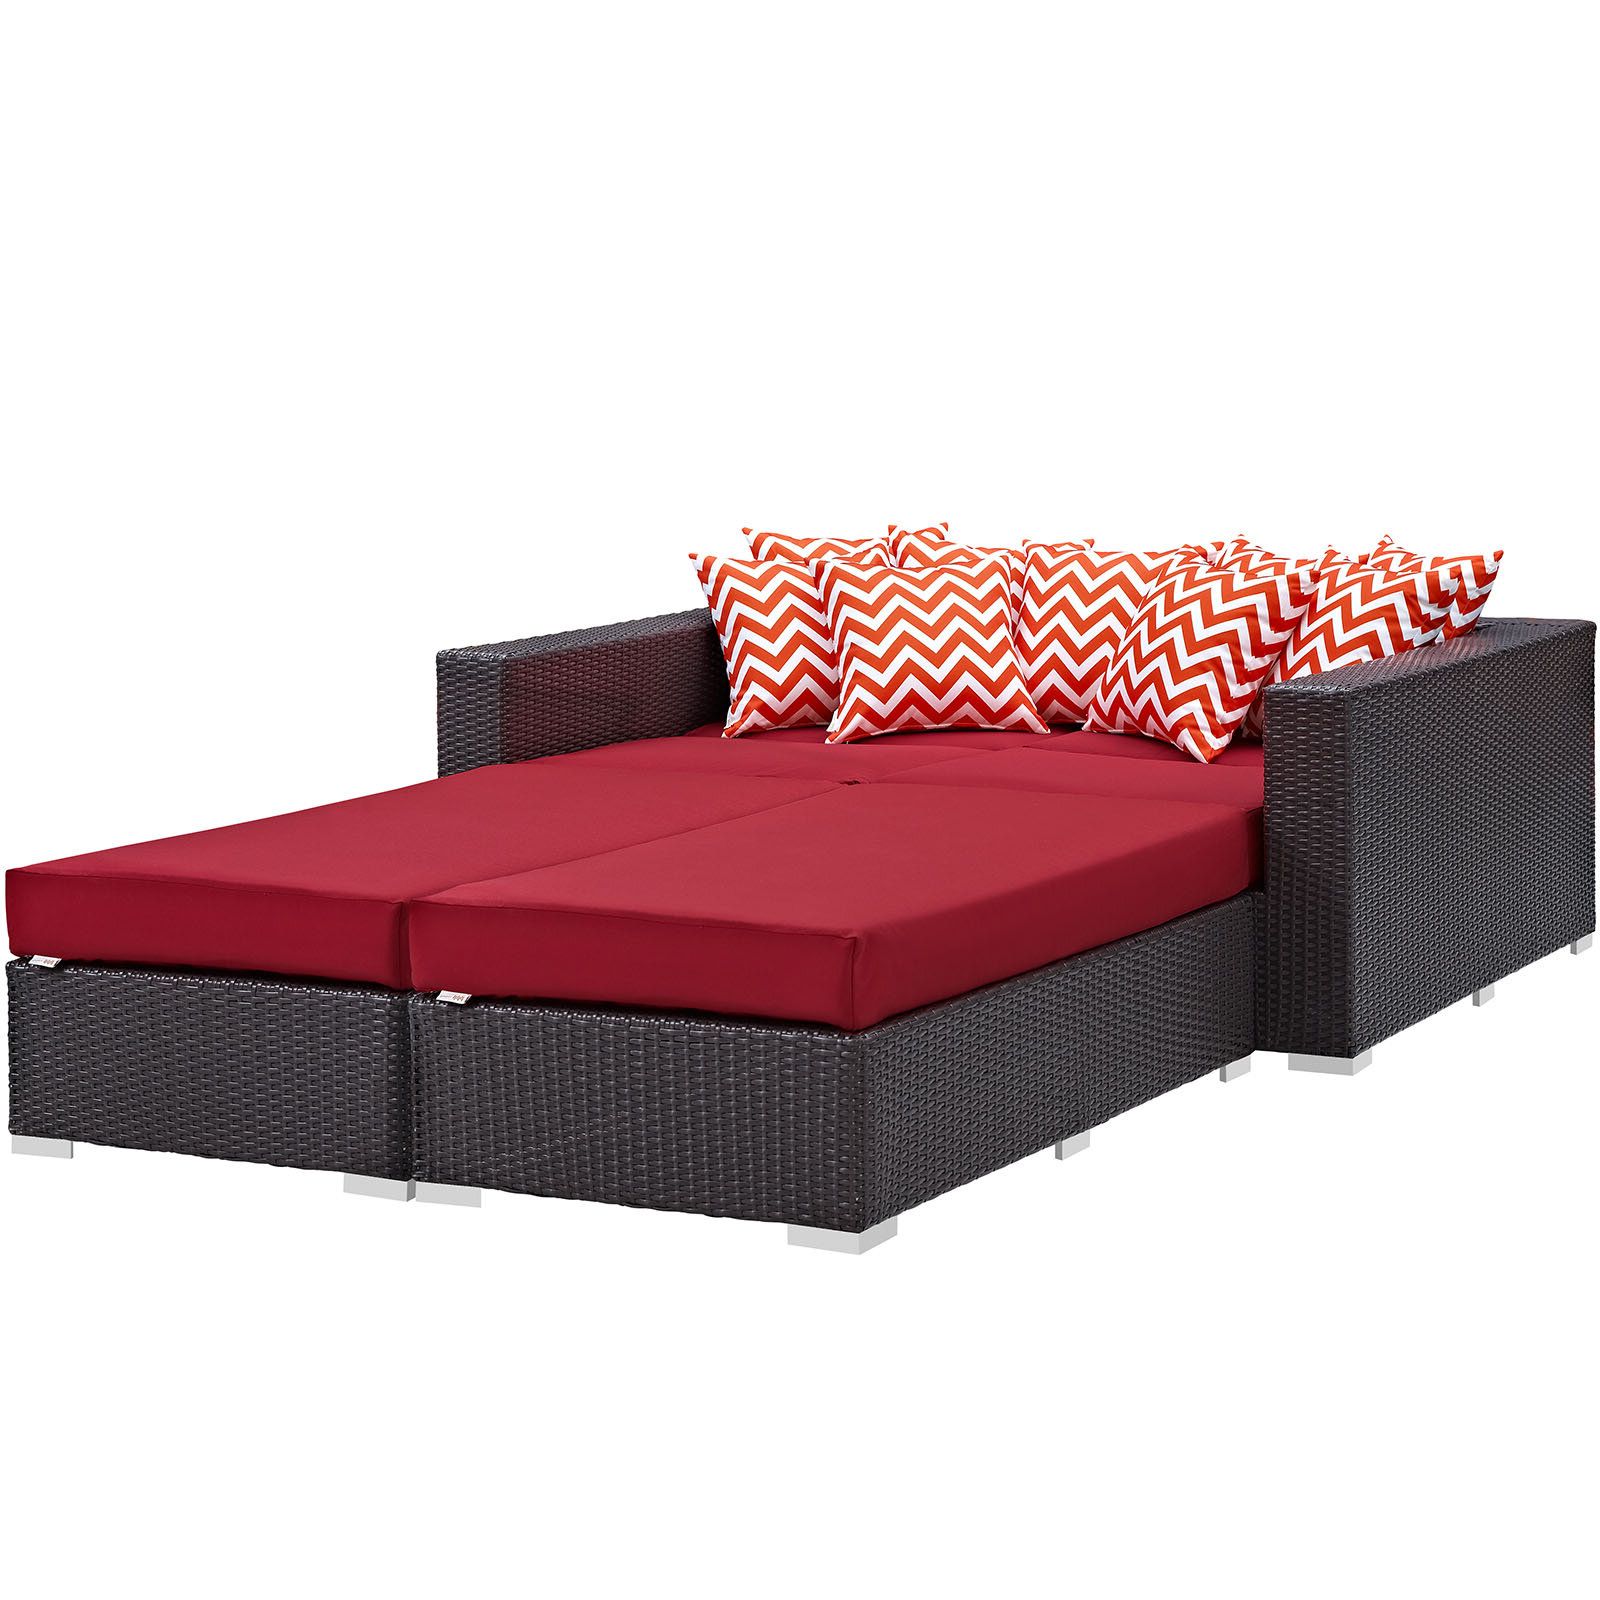 2020 Brentwood 4 Piece Patio Daybed With Cushions For Bishop Daybeds (View 13 of 25)